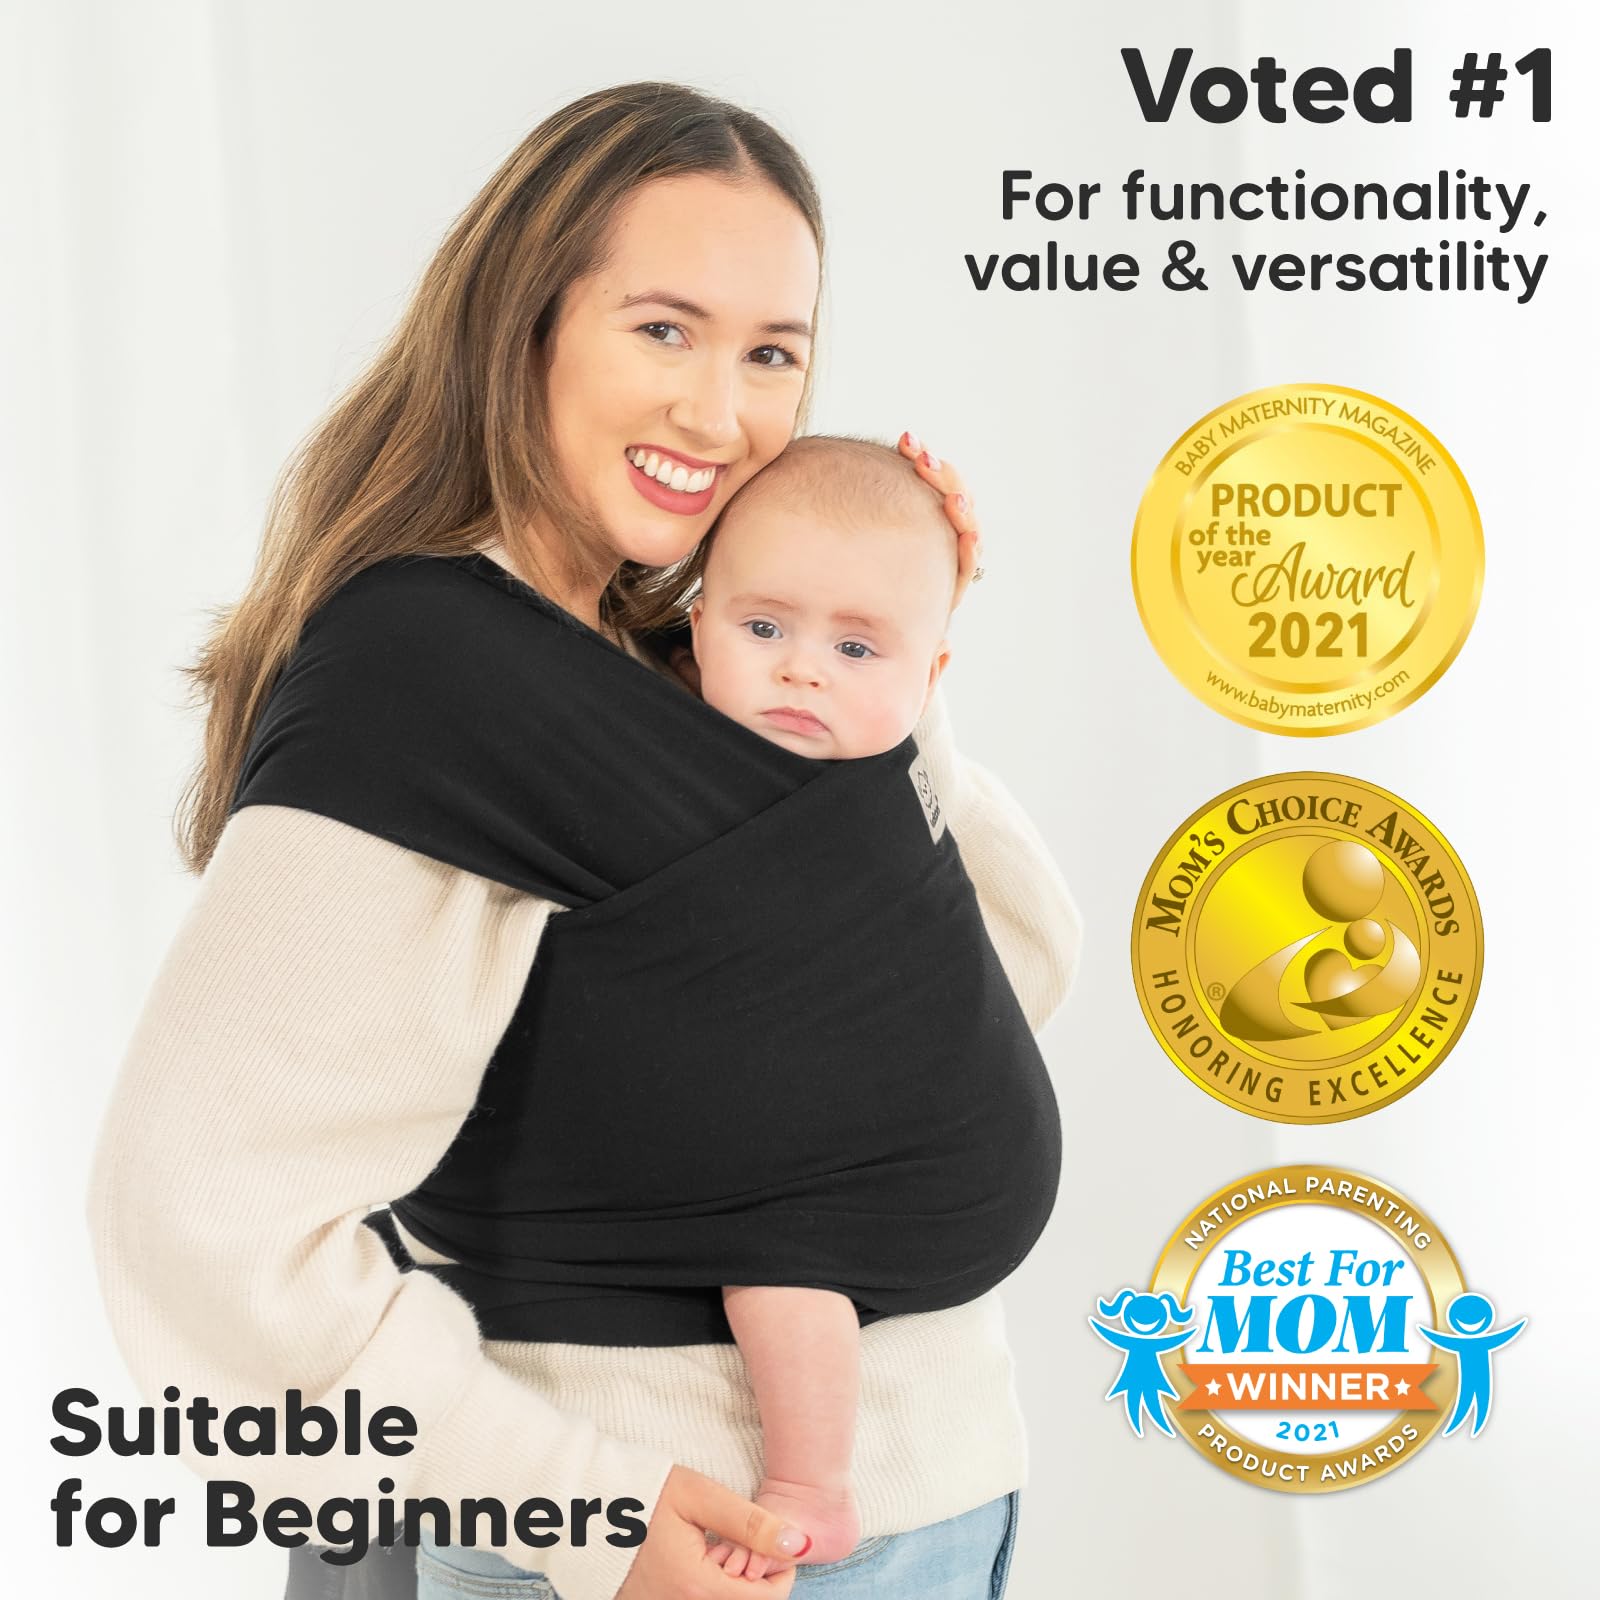 KeaBabies Baby Wrap Carrier - All in 1 Original Breathable Baby Sling, Lightweight,Hands Free Baby Carrier Sling, Baby Carrier Wrap, Baby Carriers for Newborn,Infant, Baby Wraps Carrier (Trendy Black)